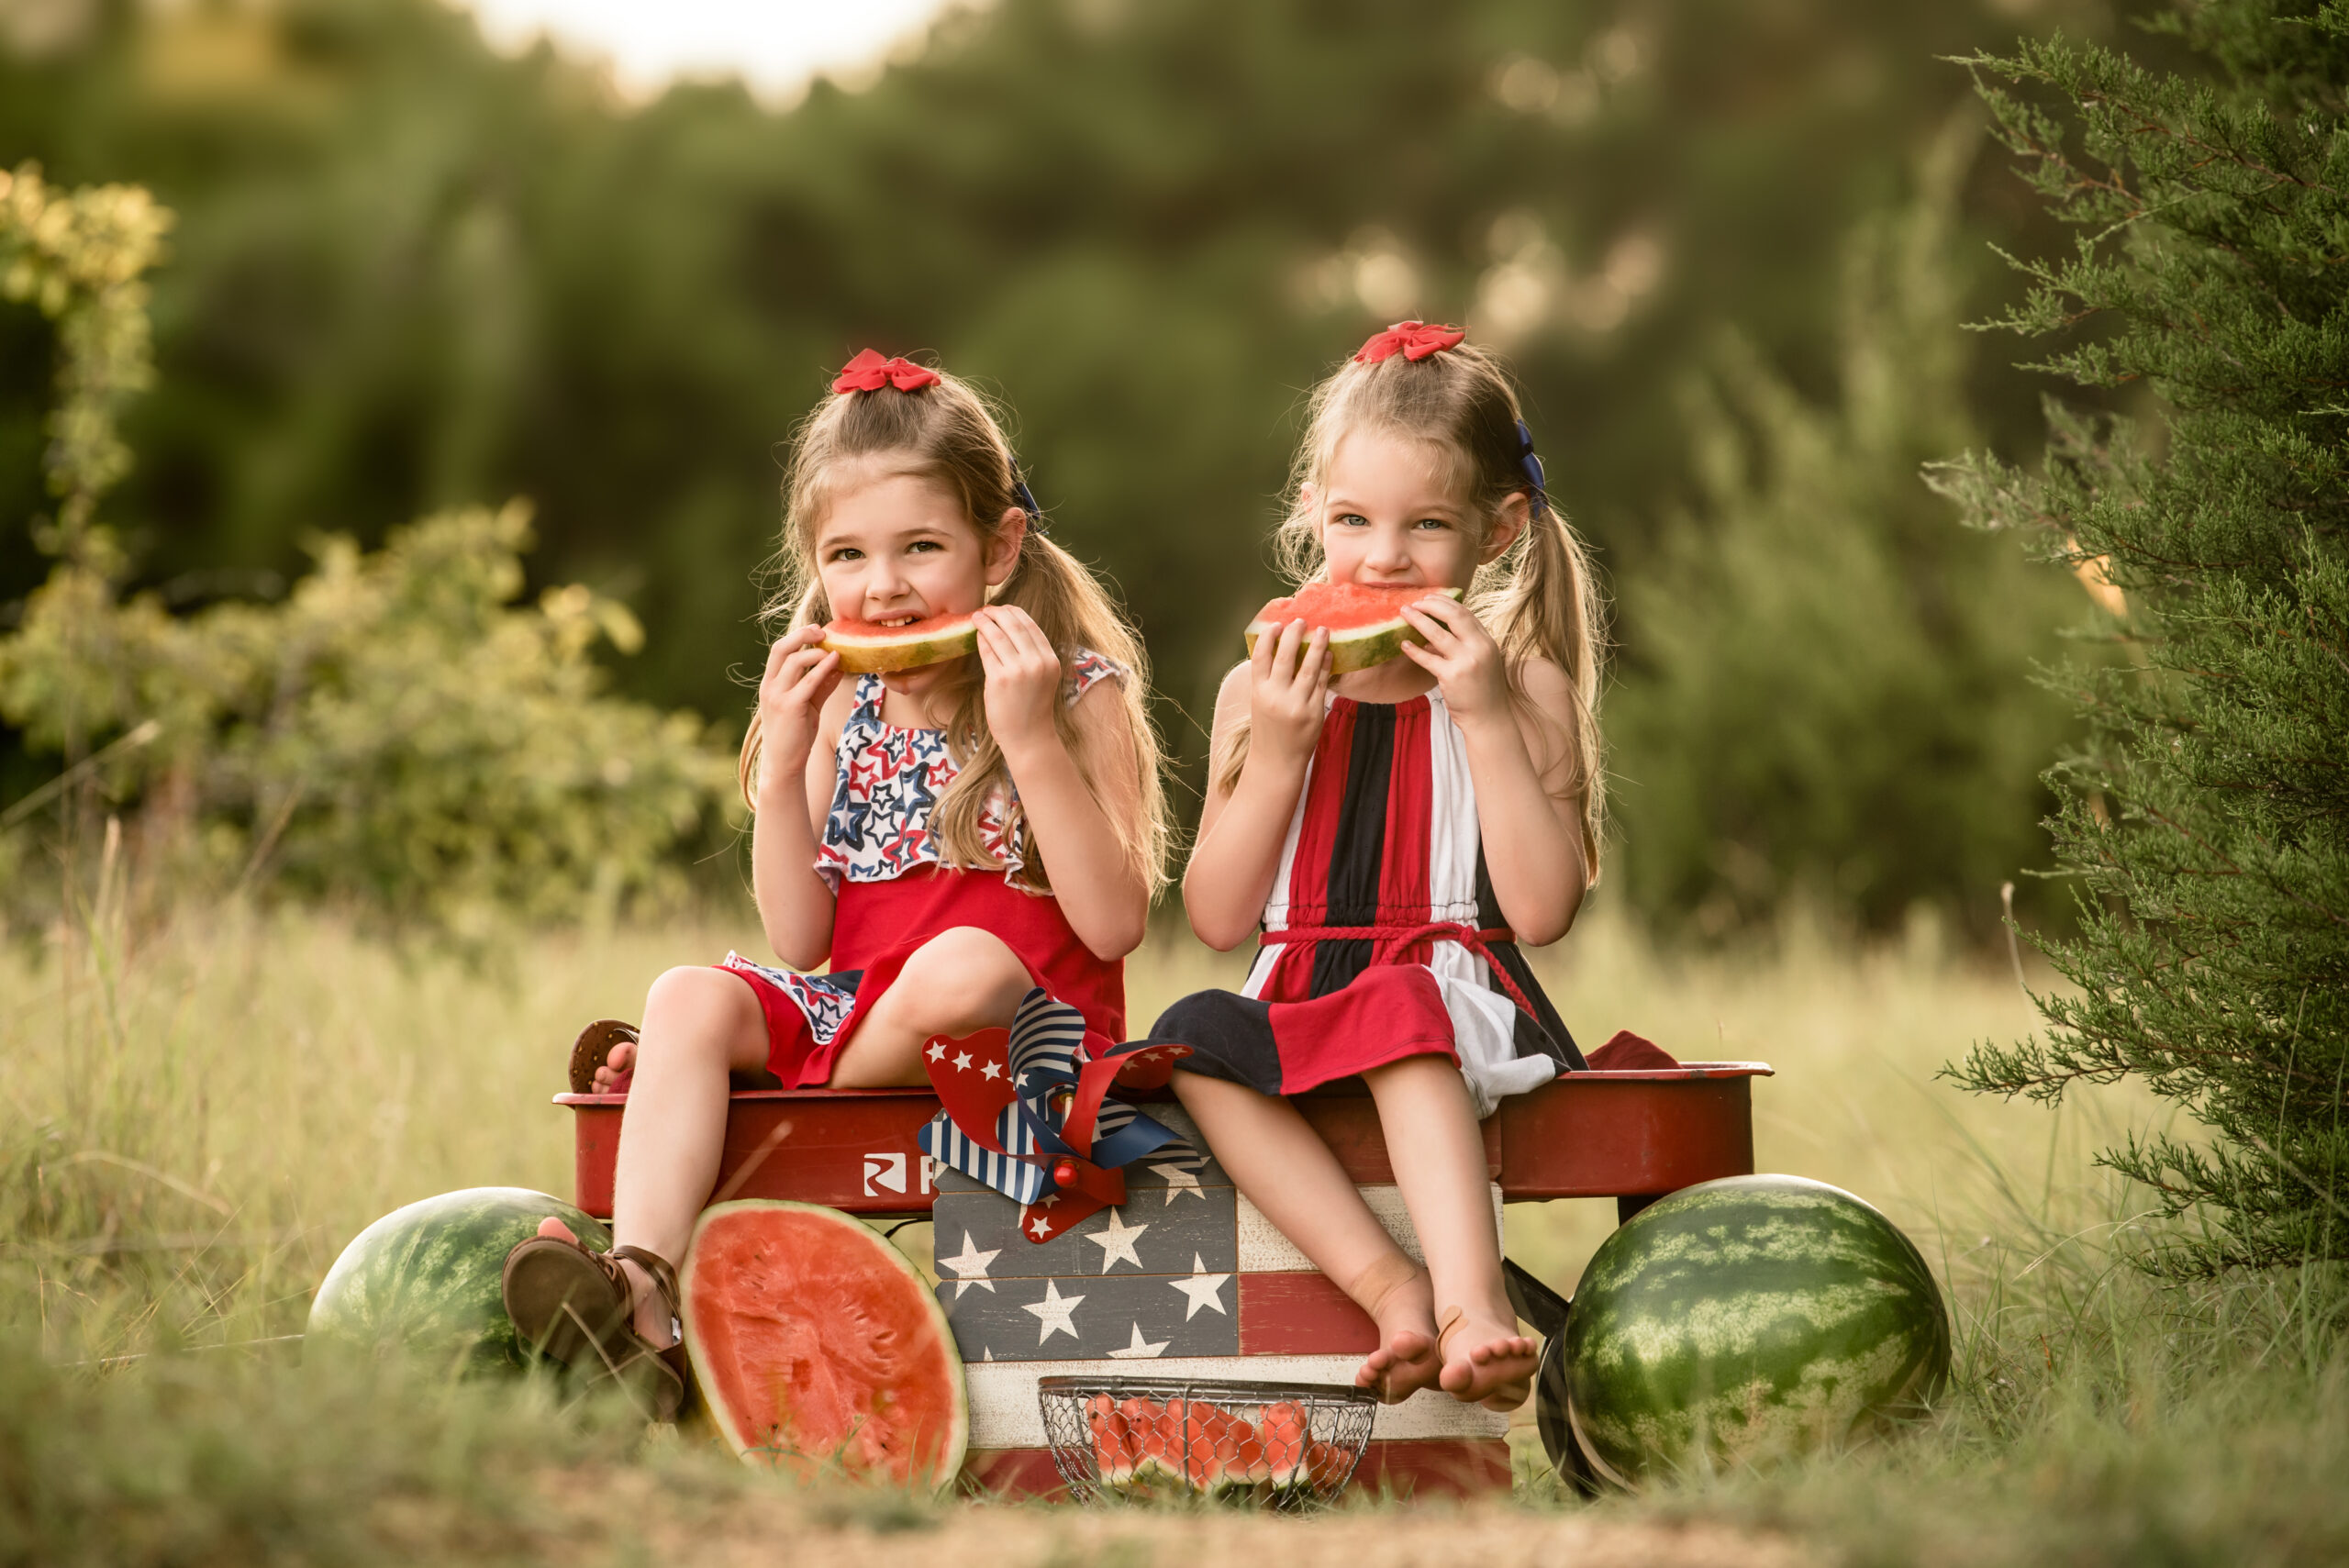 little girls sitting in a red wagon eating watermelon Things To Do in Waco with Kids